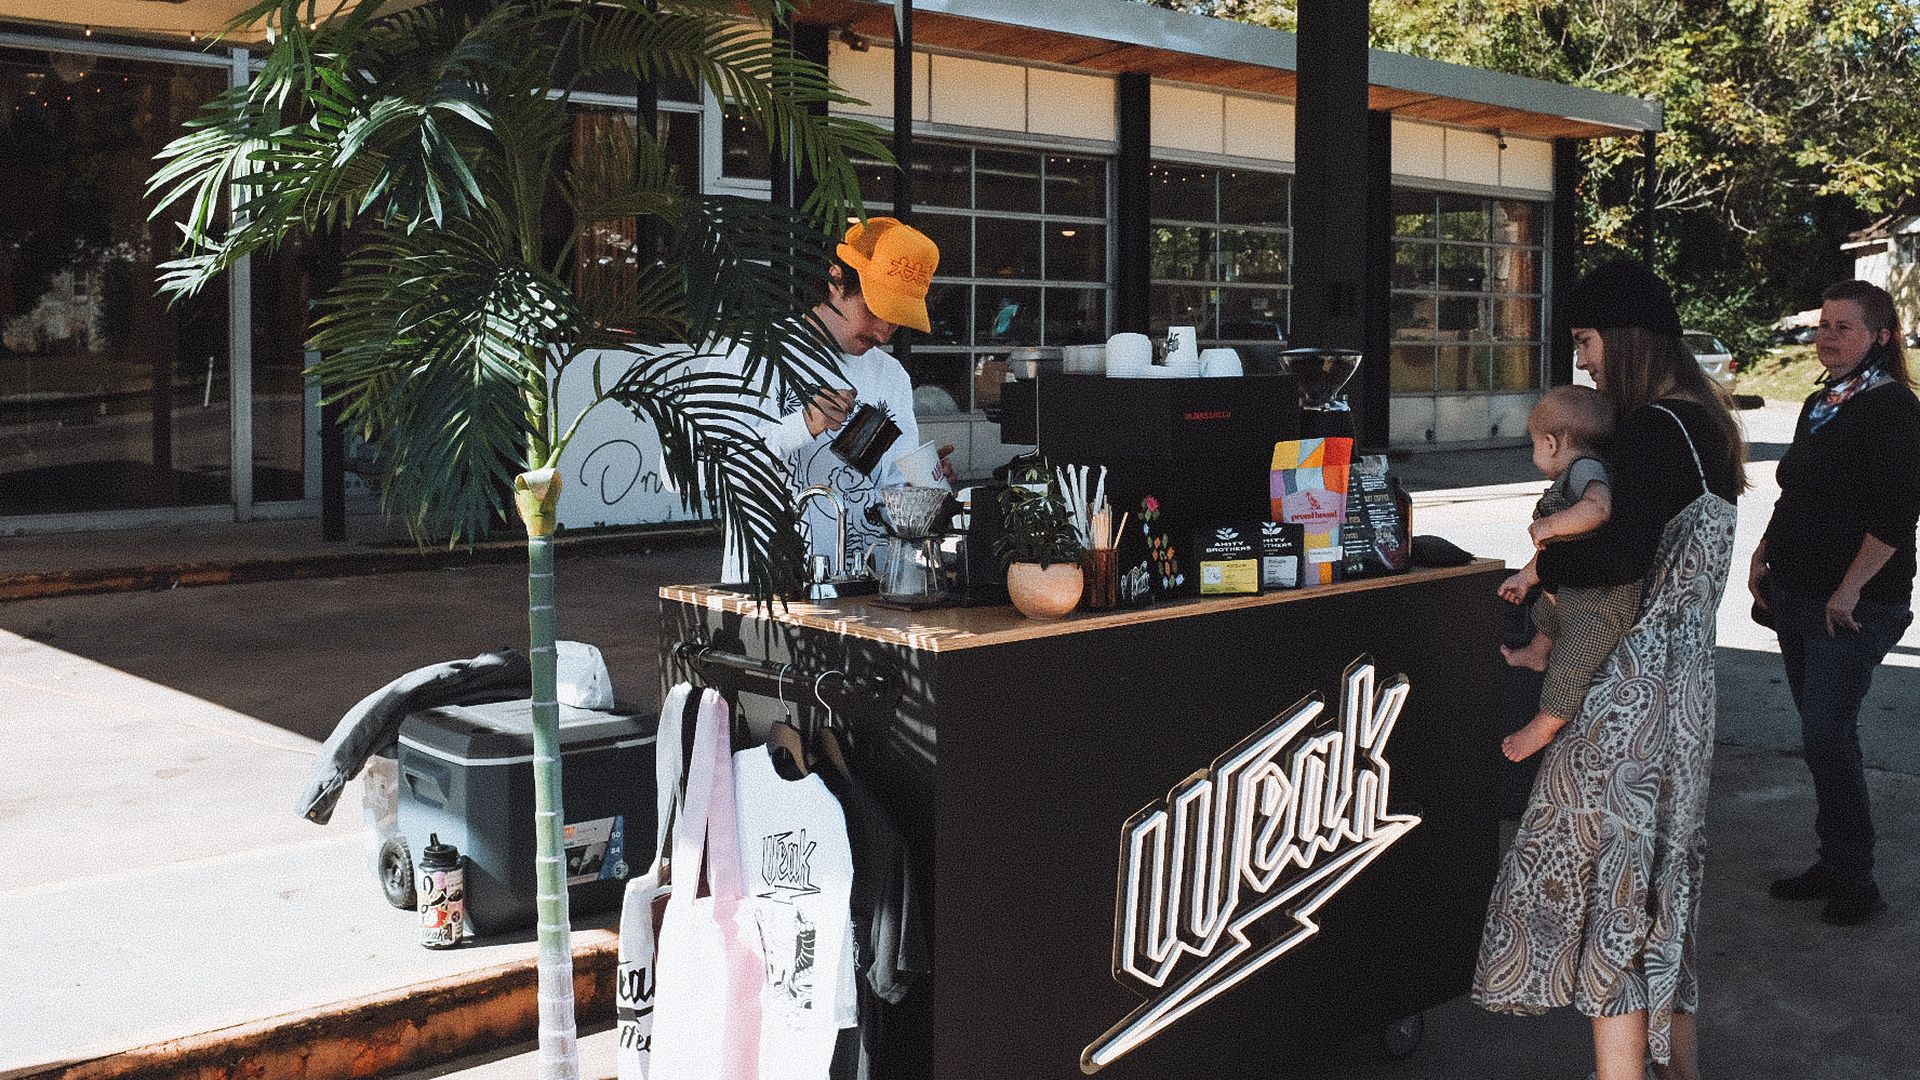 Patrons order coffee at an outdoor coffee cart